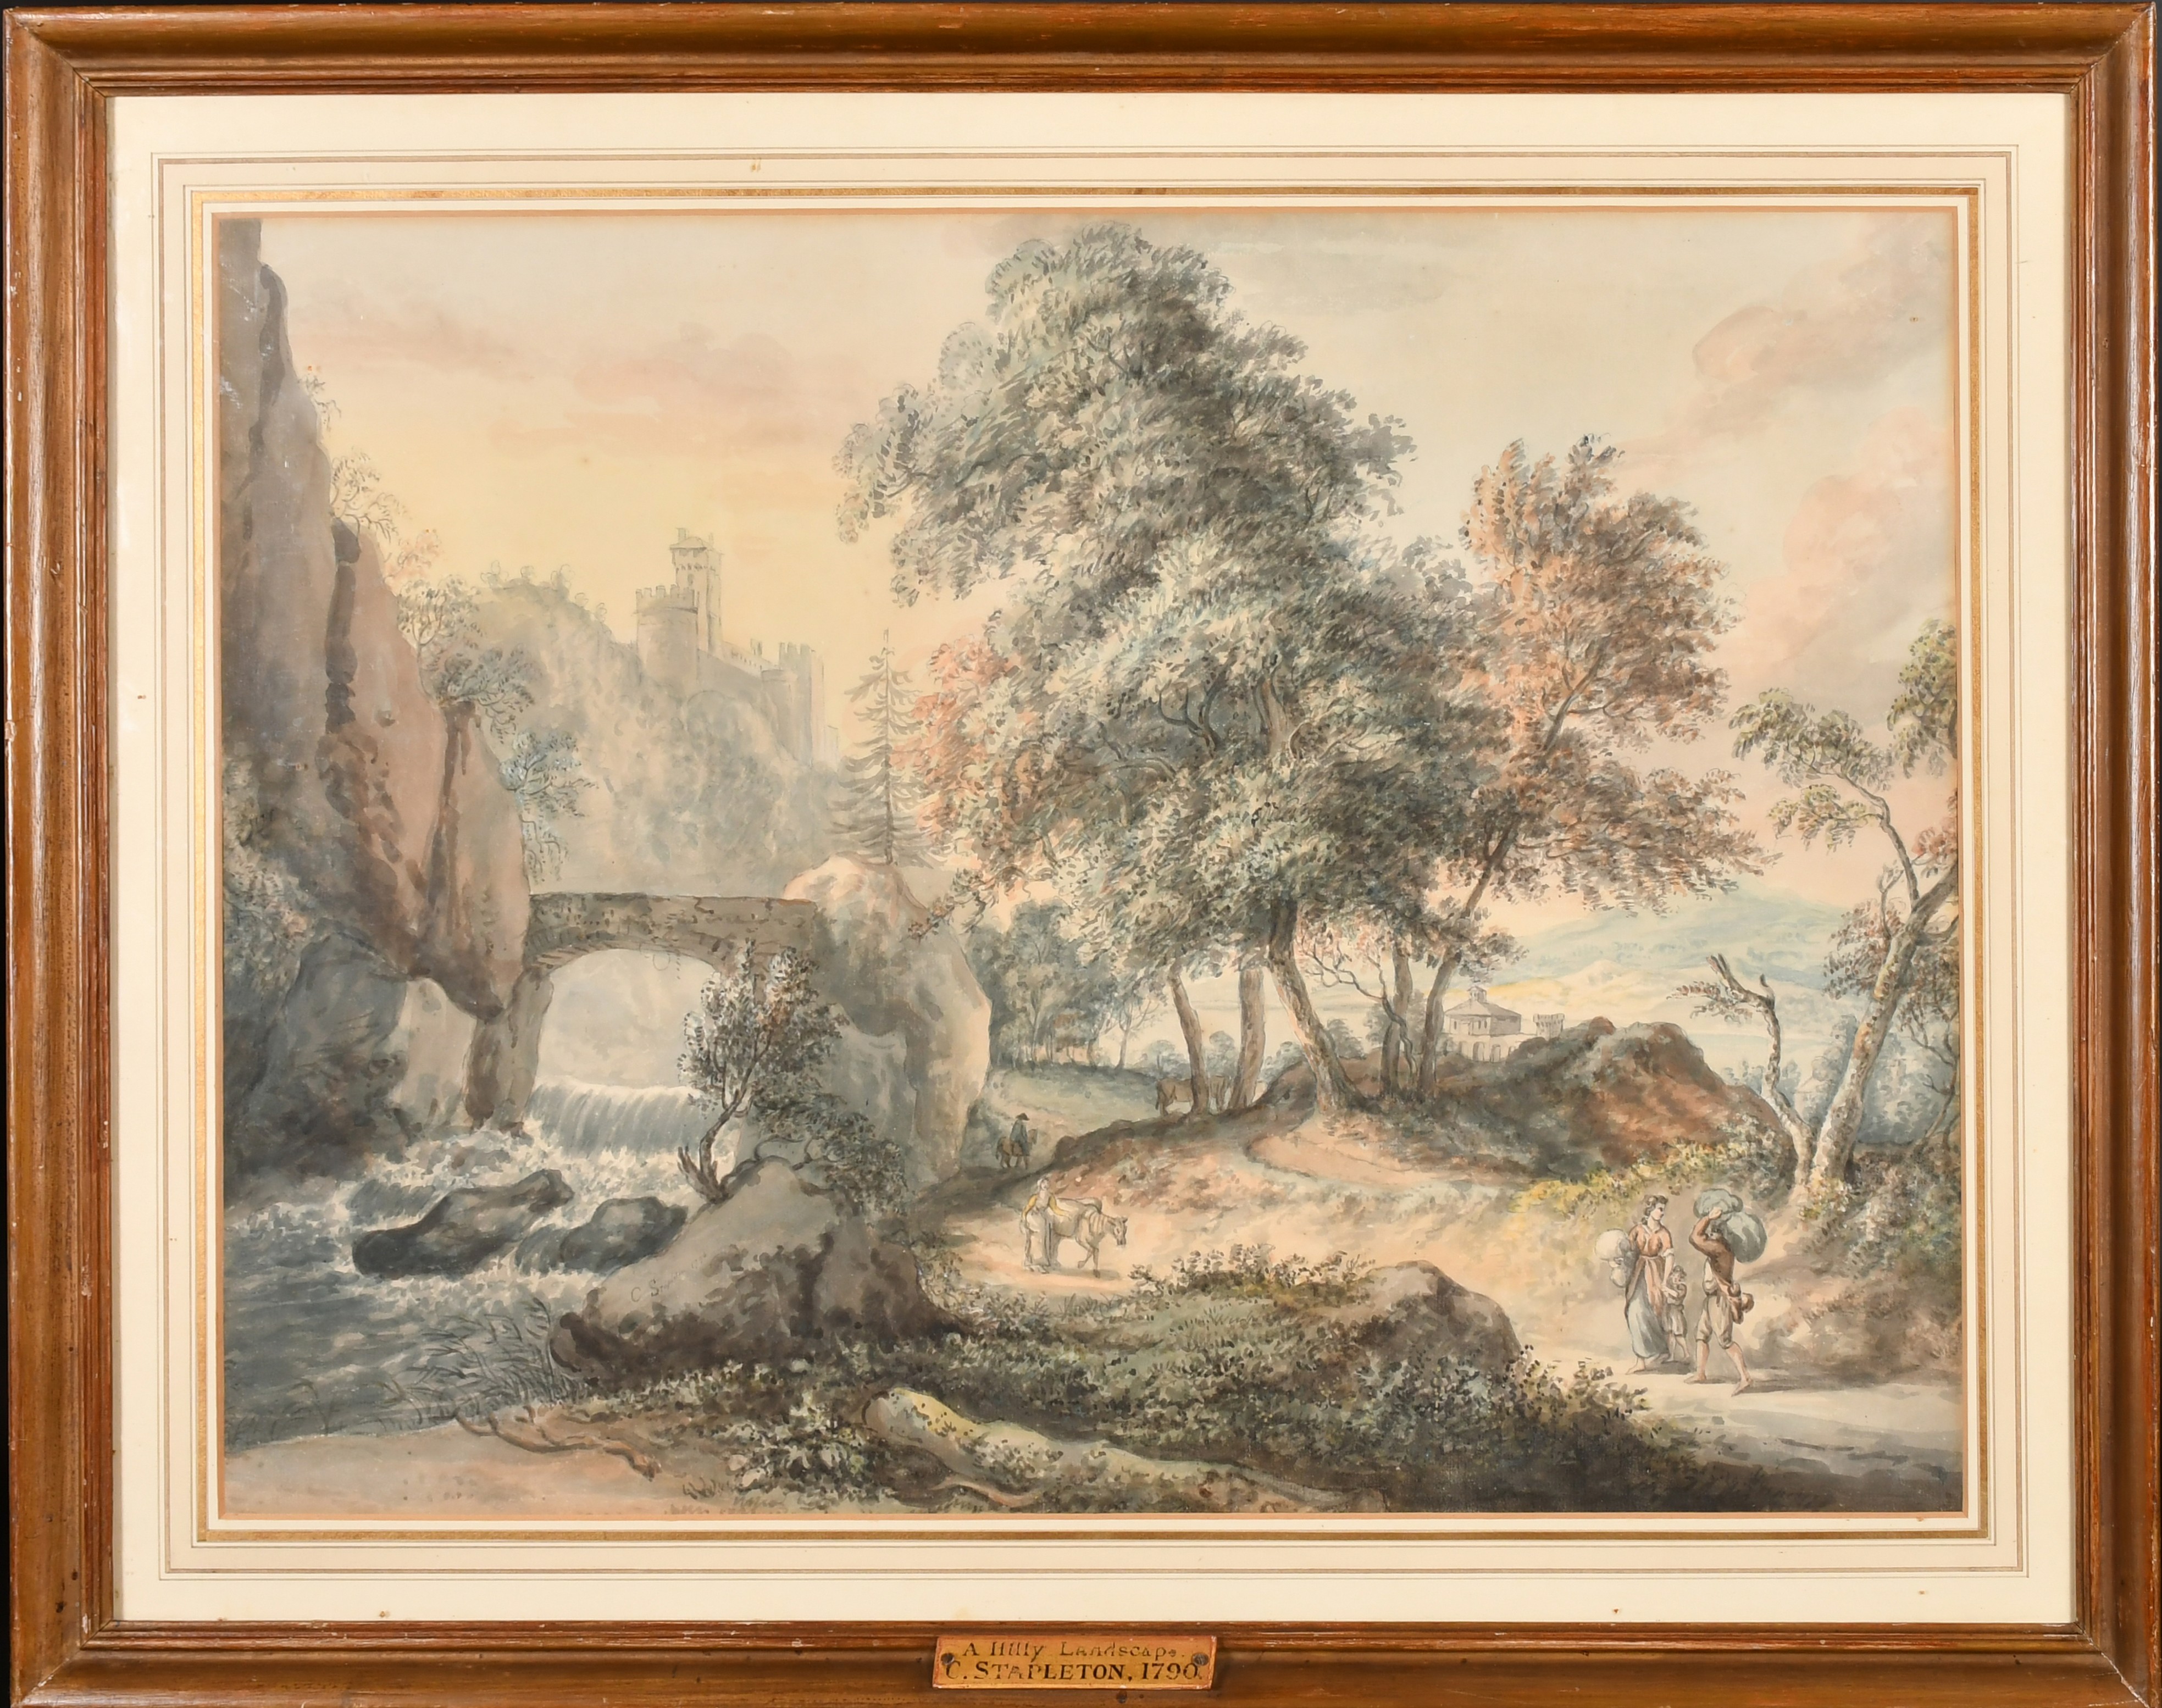 C Stapleton (18th-19th Century) British. "A Hilly Landscape", Watercolour, Signed and dated 1790, - Image 2 of 5